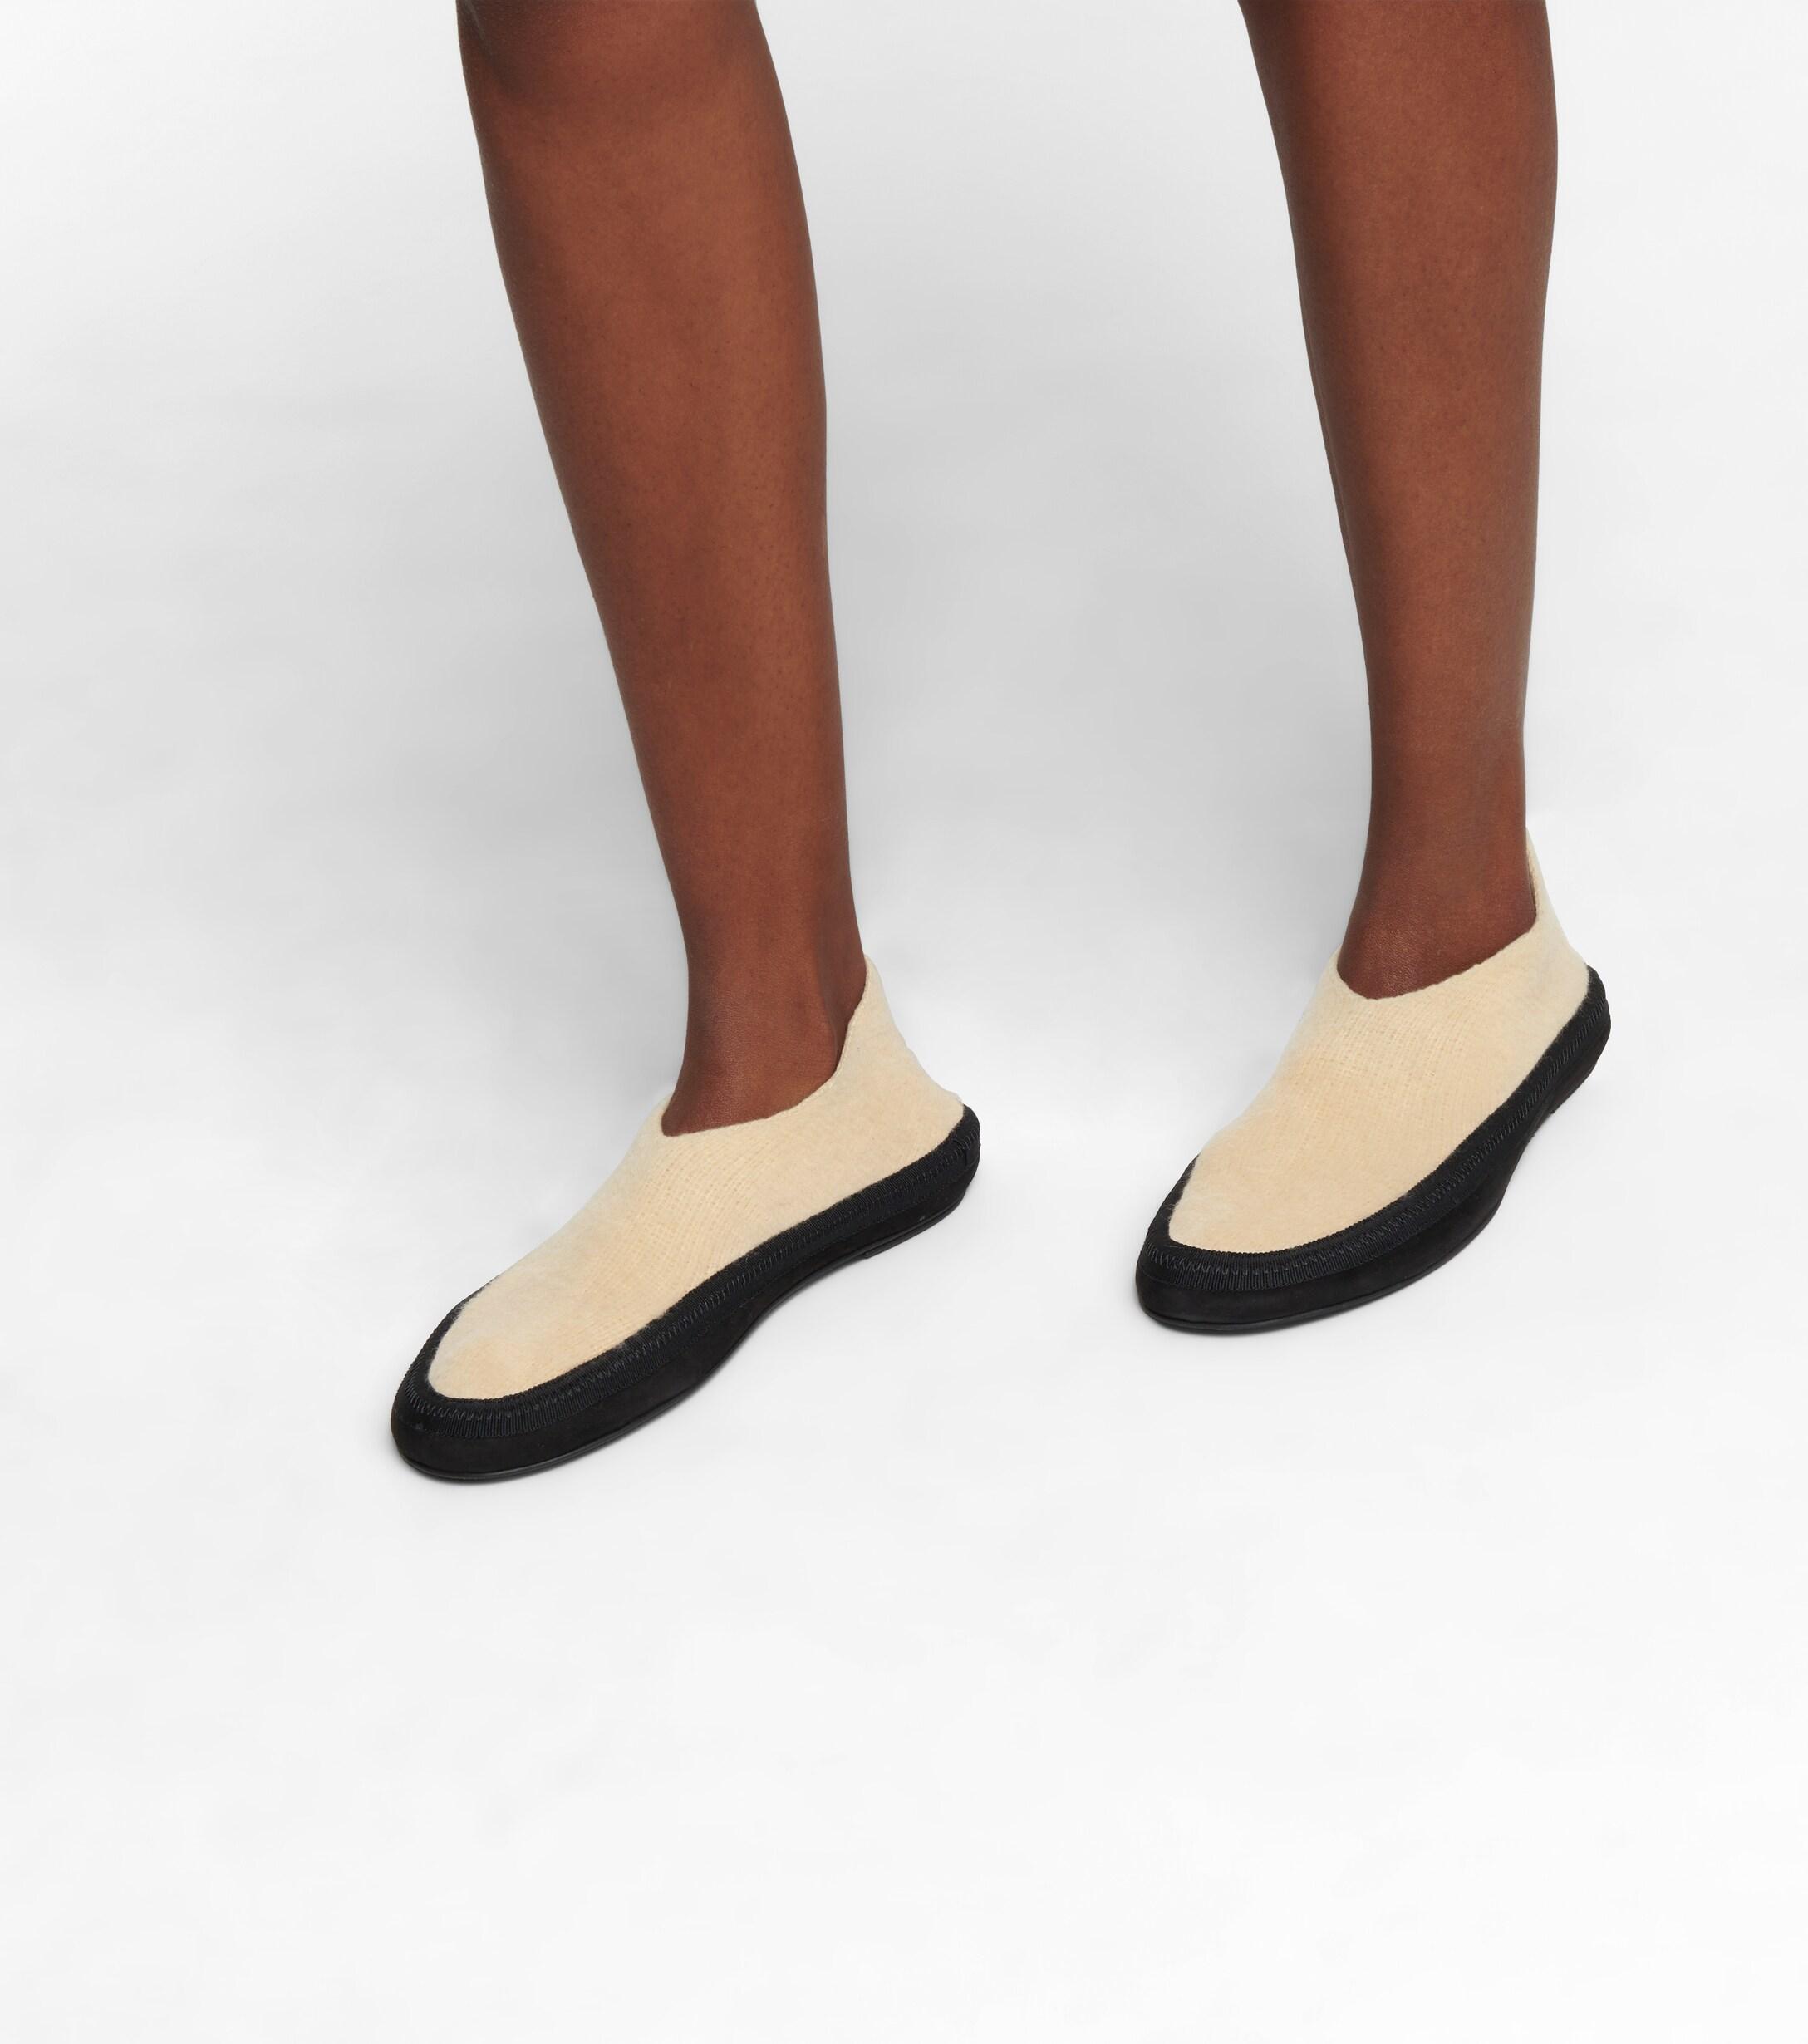 Buy > cashmere ballet flats > in stock